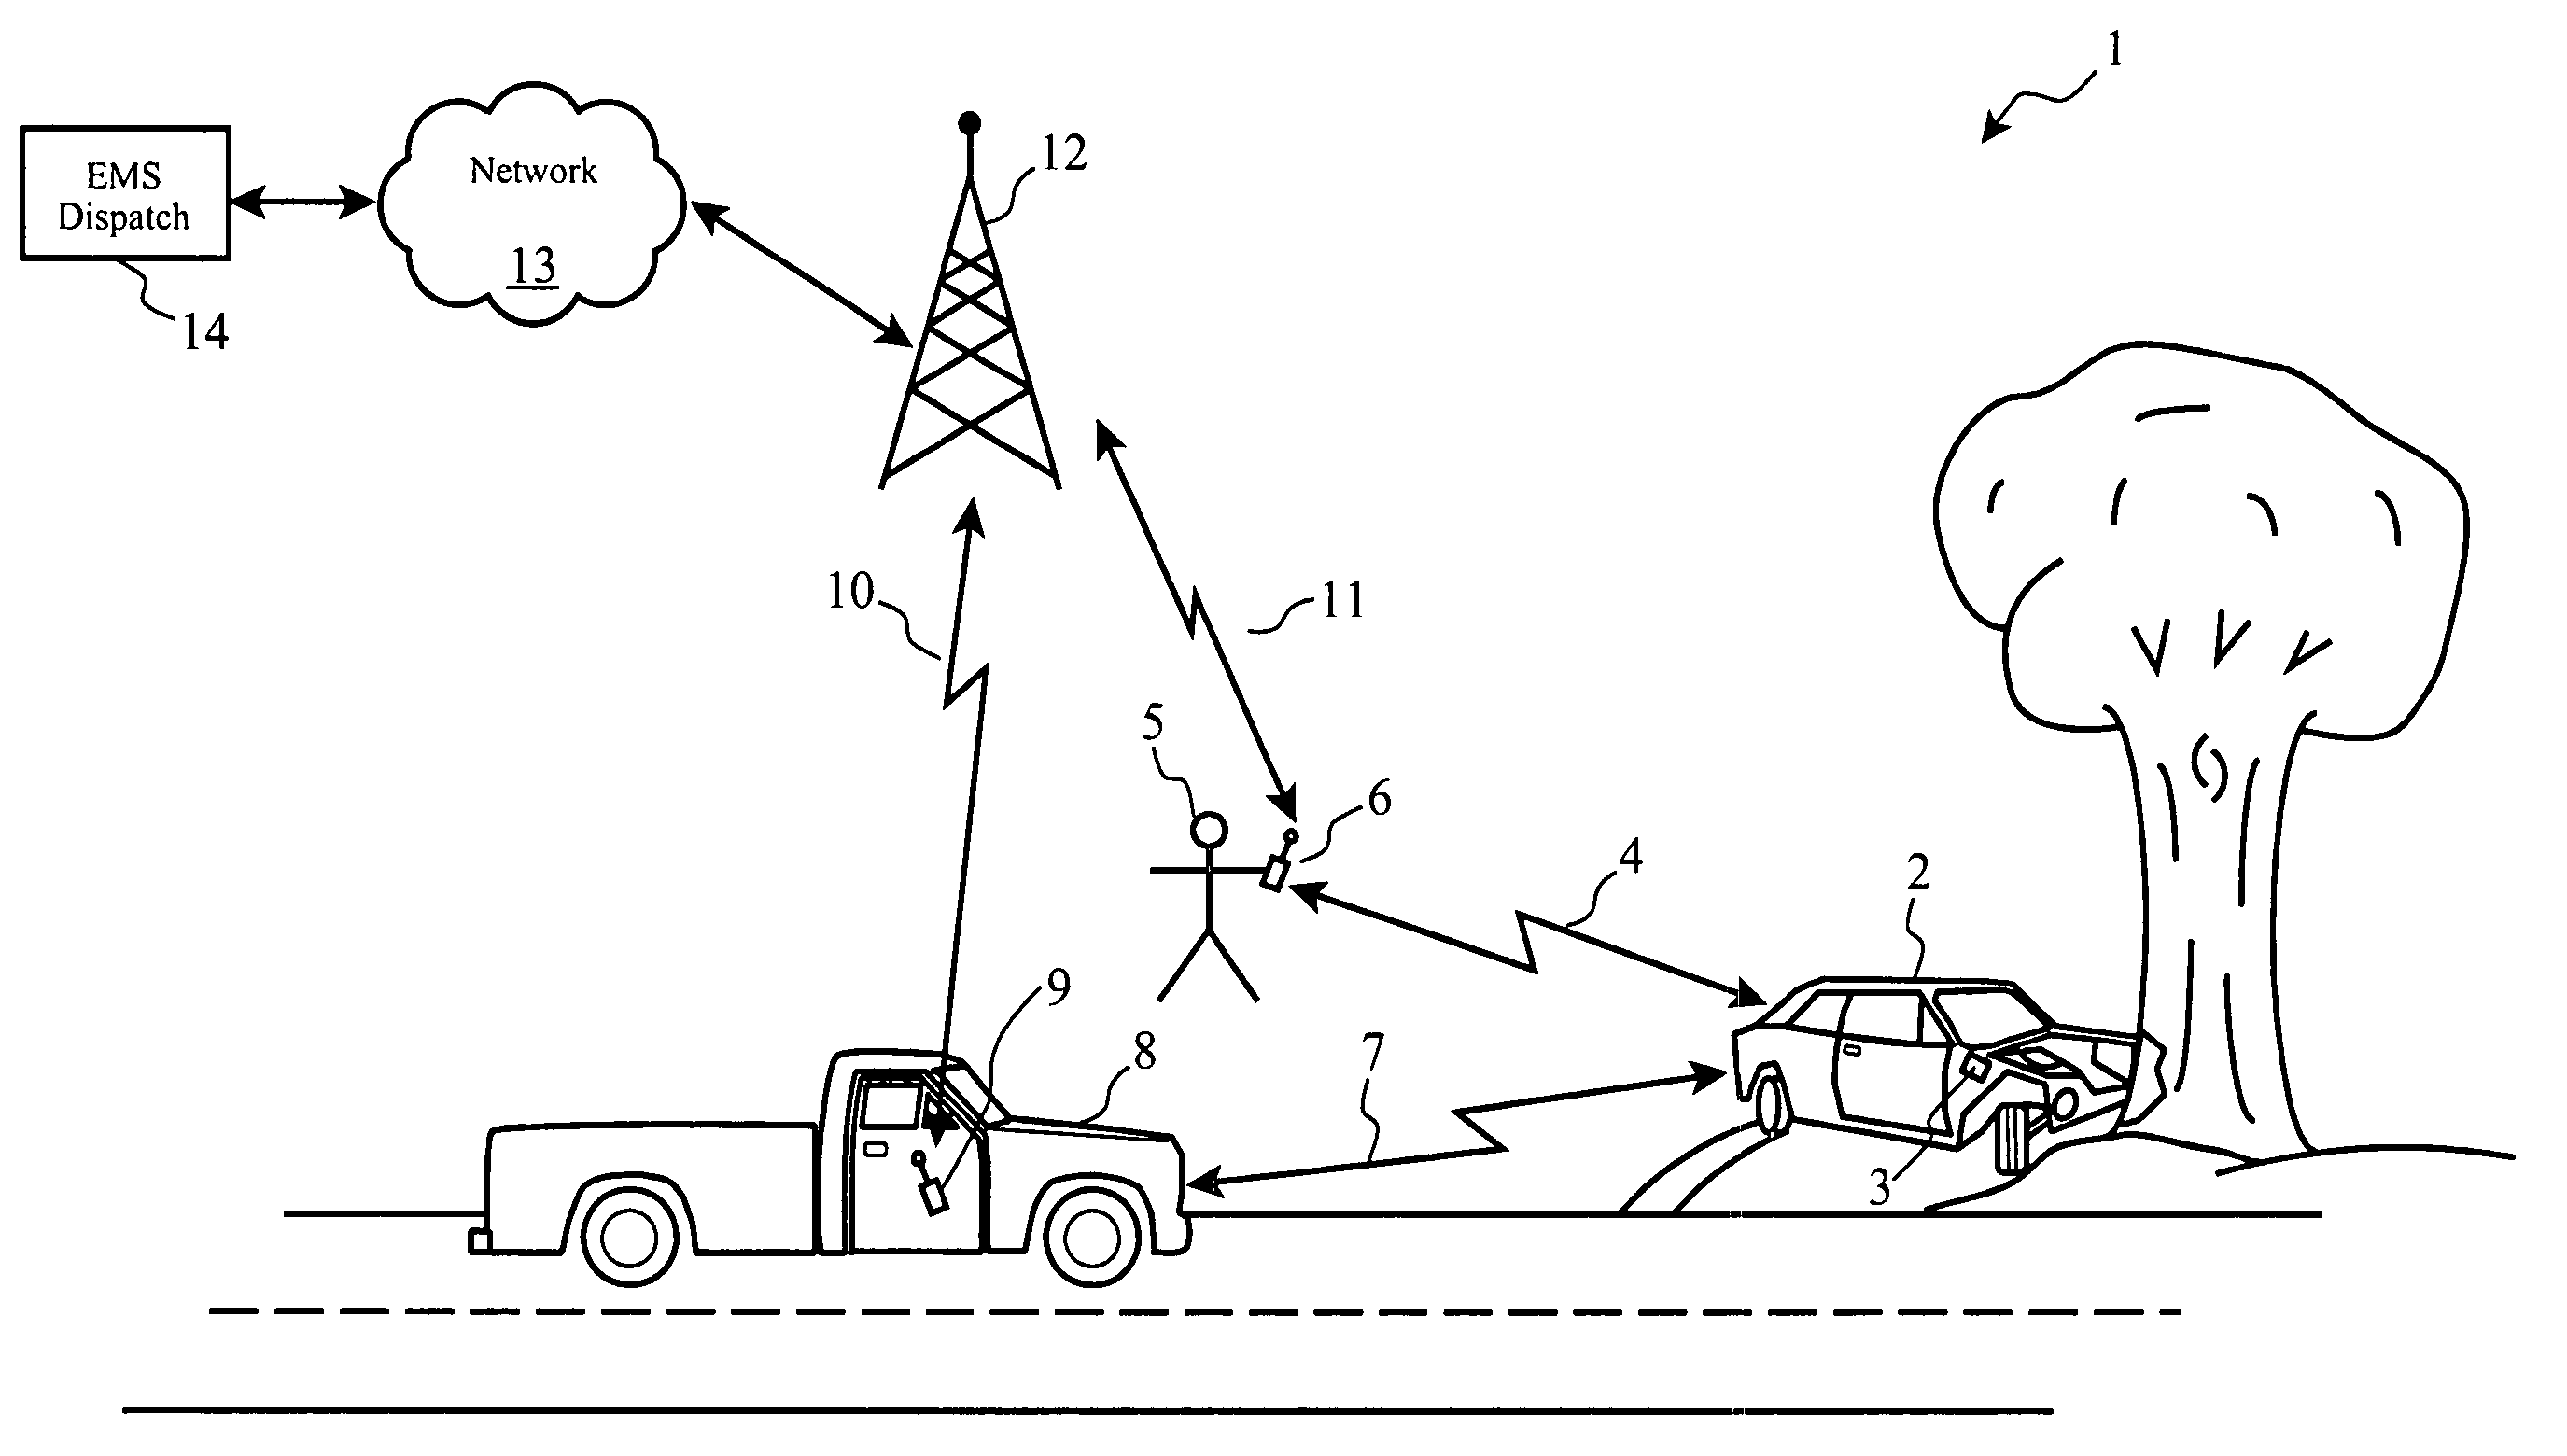 System for automatic wireless utilization of cellular telephone devices in an emergency by co-opting nearby cellular telephone devices